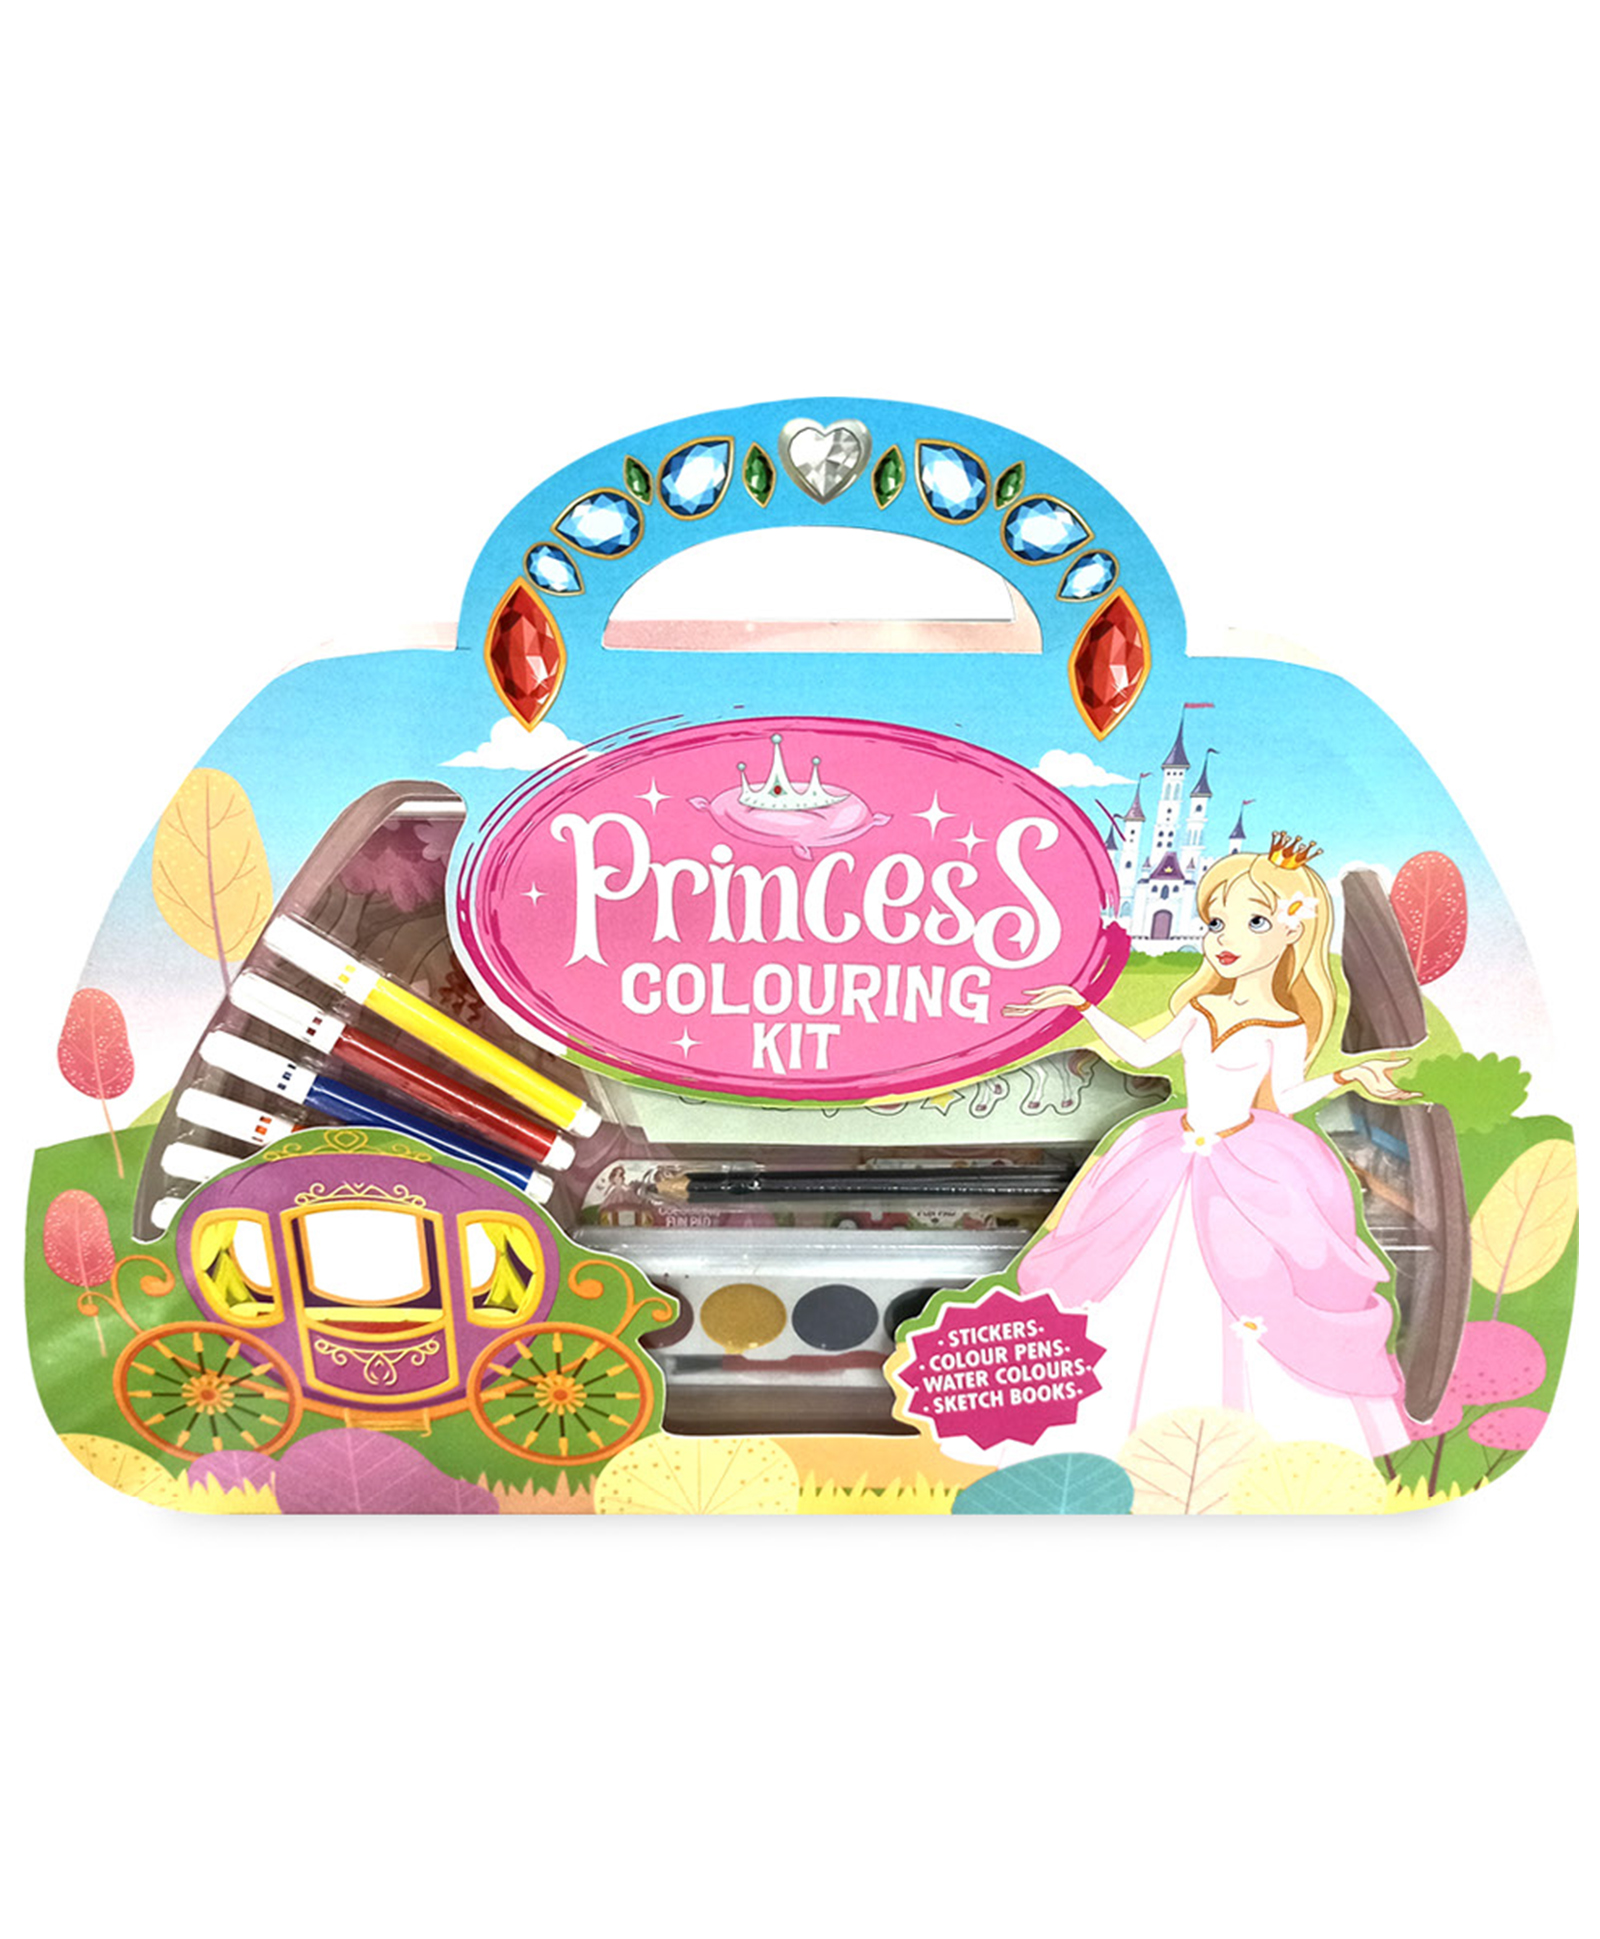 Princess Colouring Kit with stickers, Colouring Pens & Water Colour Set